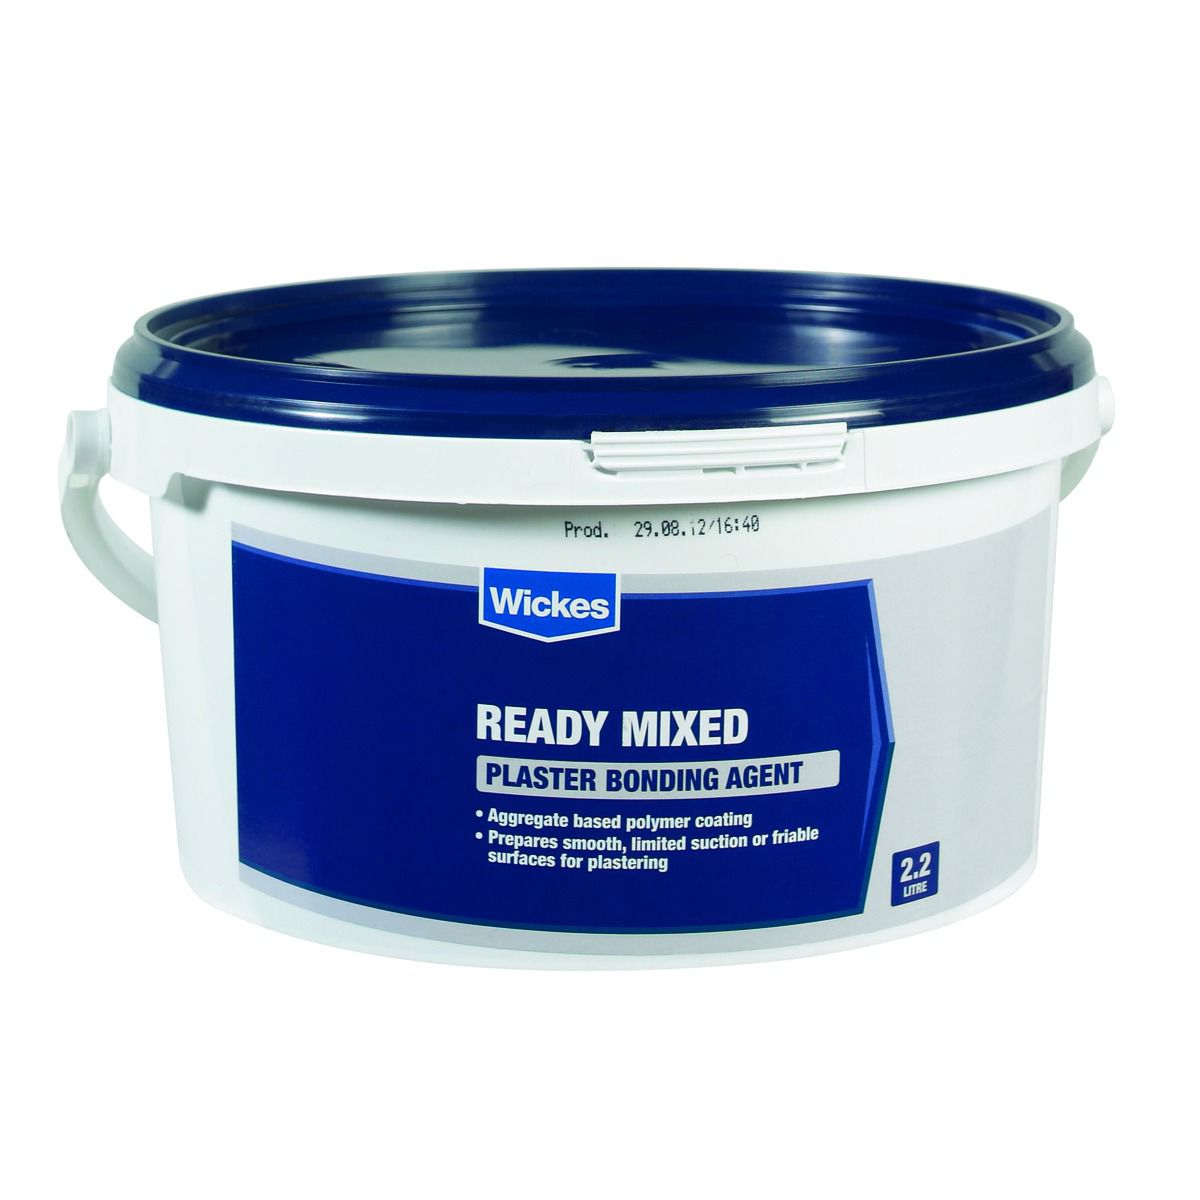 Image of Wickes Ready Mixed Plaster Bonding Agent - 3kg